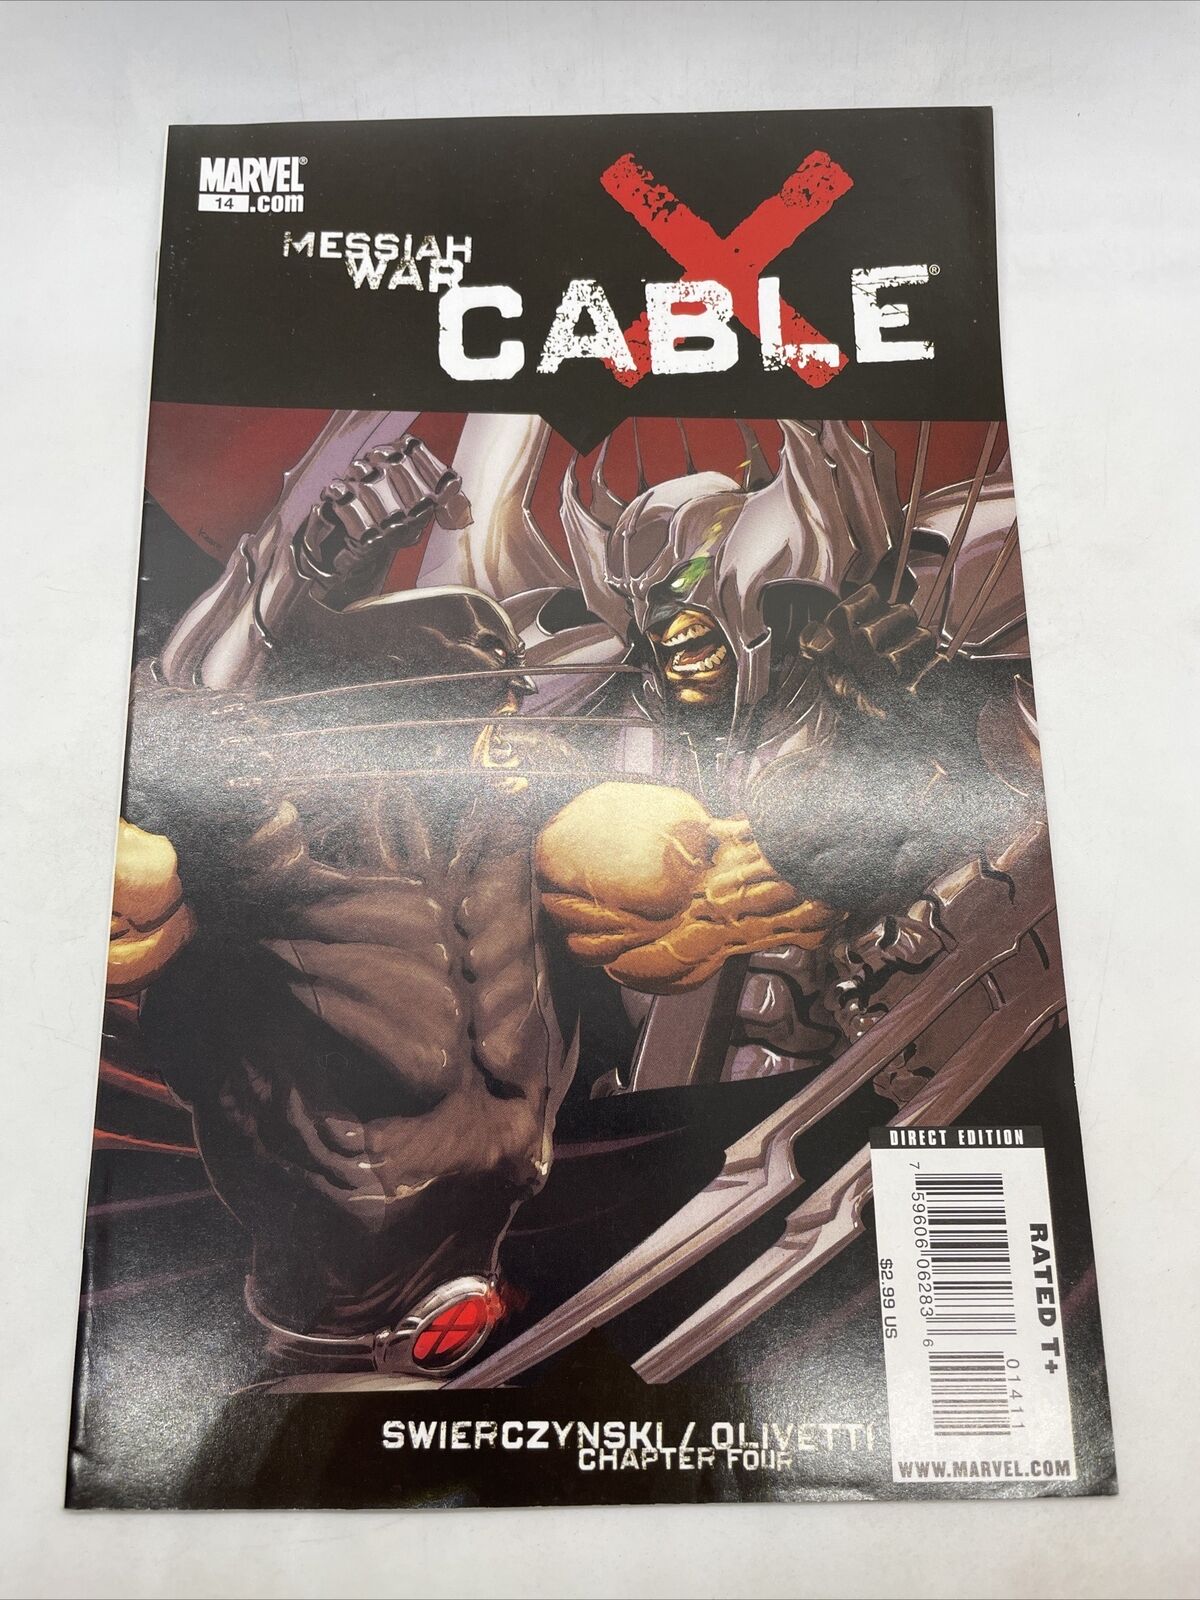 Marvel Comic Book X-Force/Cable: Messiah War #14